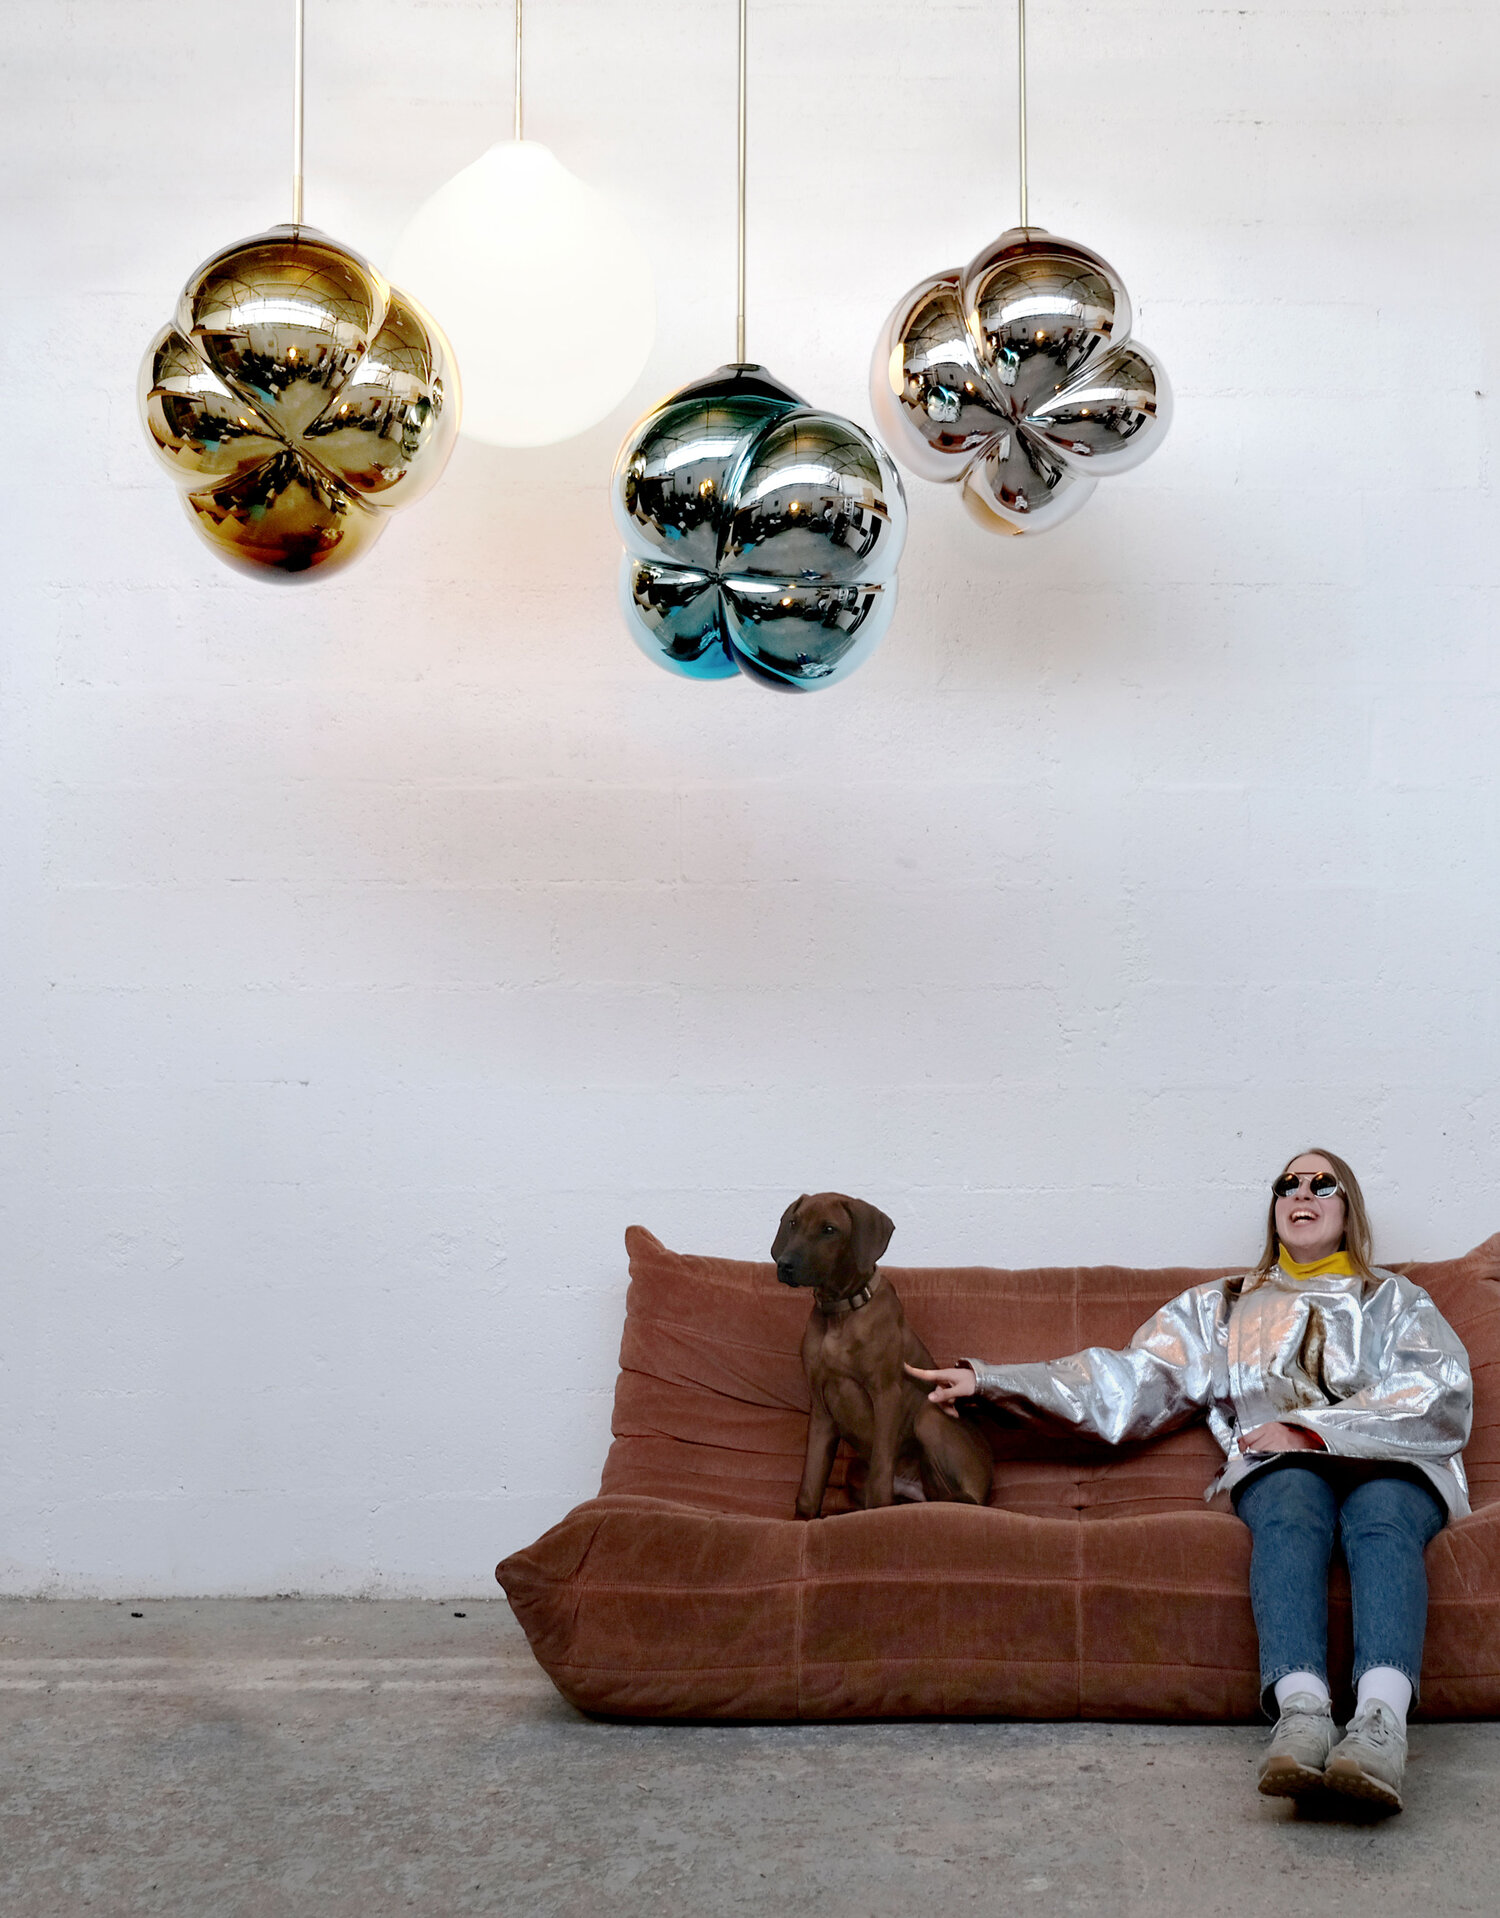 Four pendulum lights, one a white sphere, the other three are different metallic toned organic shapes like balloons over a laughing woman seated on a couch with a dog.